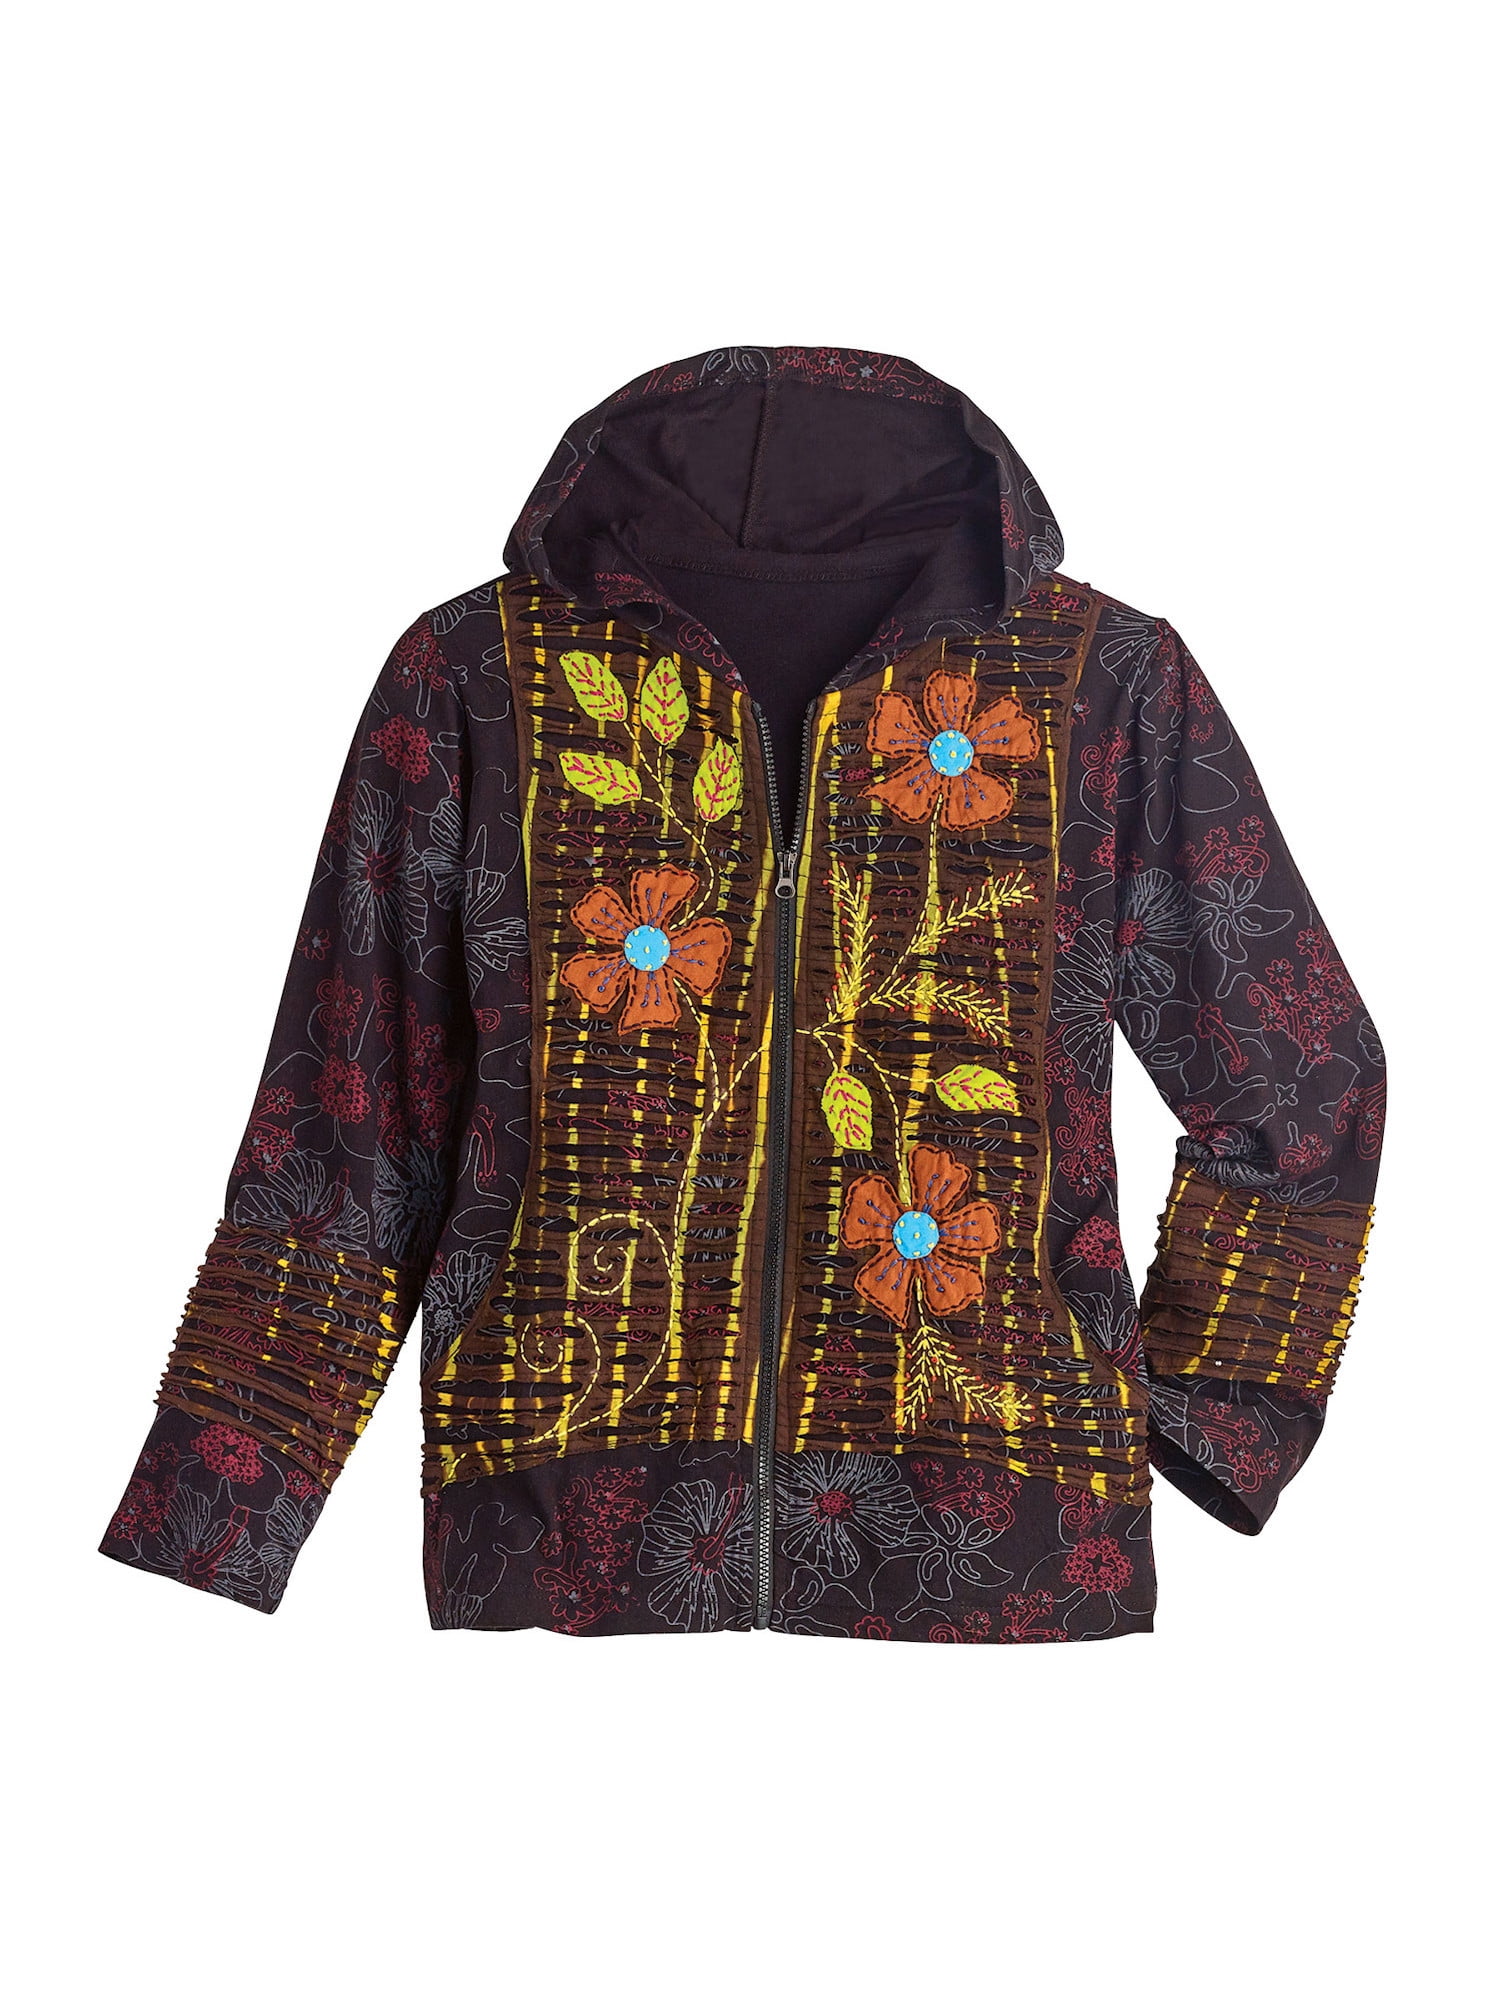 Rising International - Rising International Women's Floral Embroidered ...